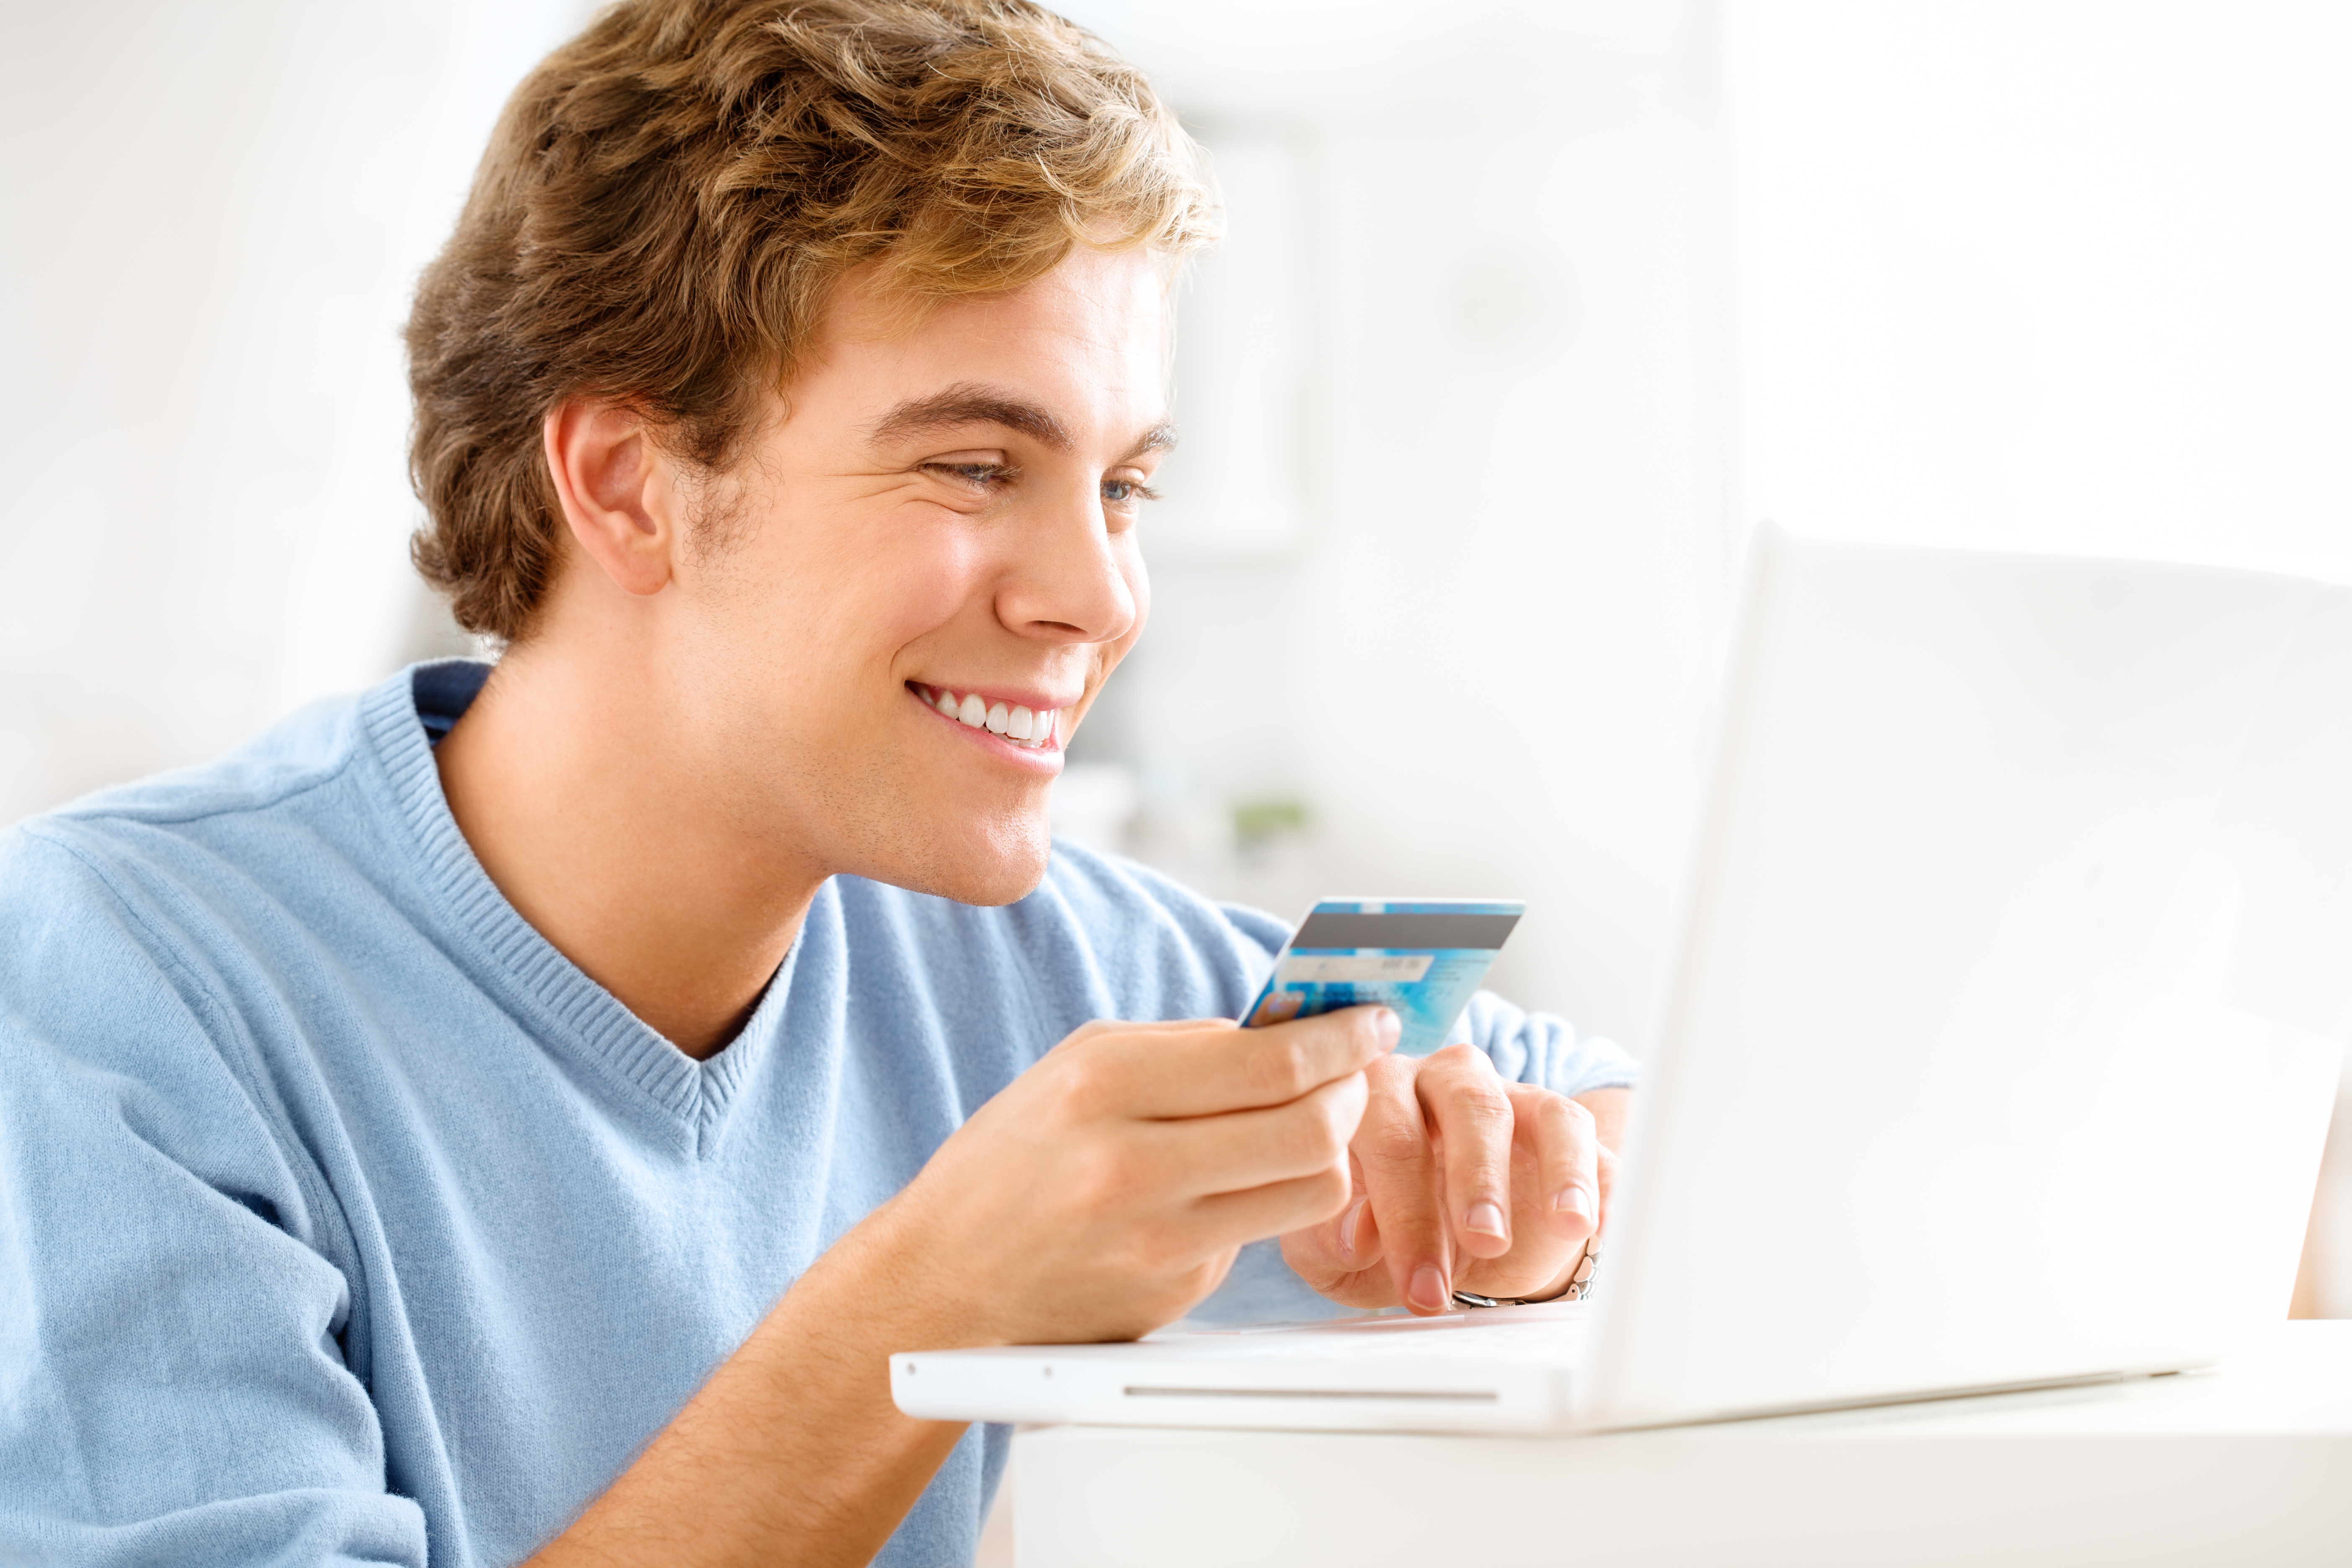 A young man uses his credit card to shop online.